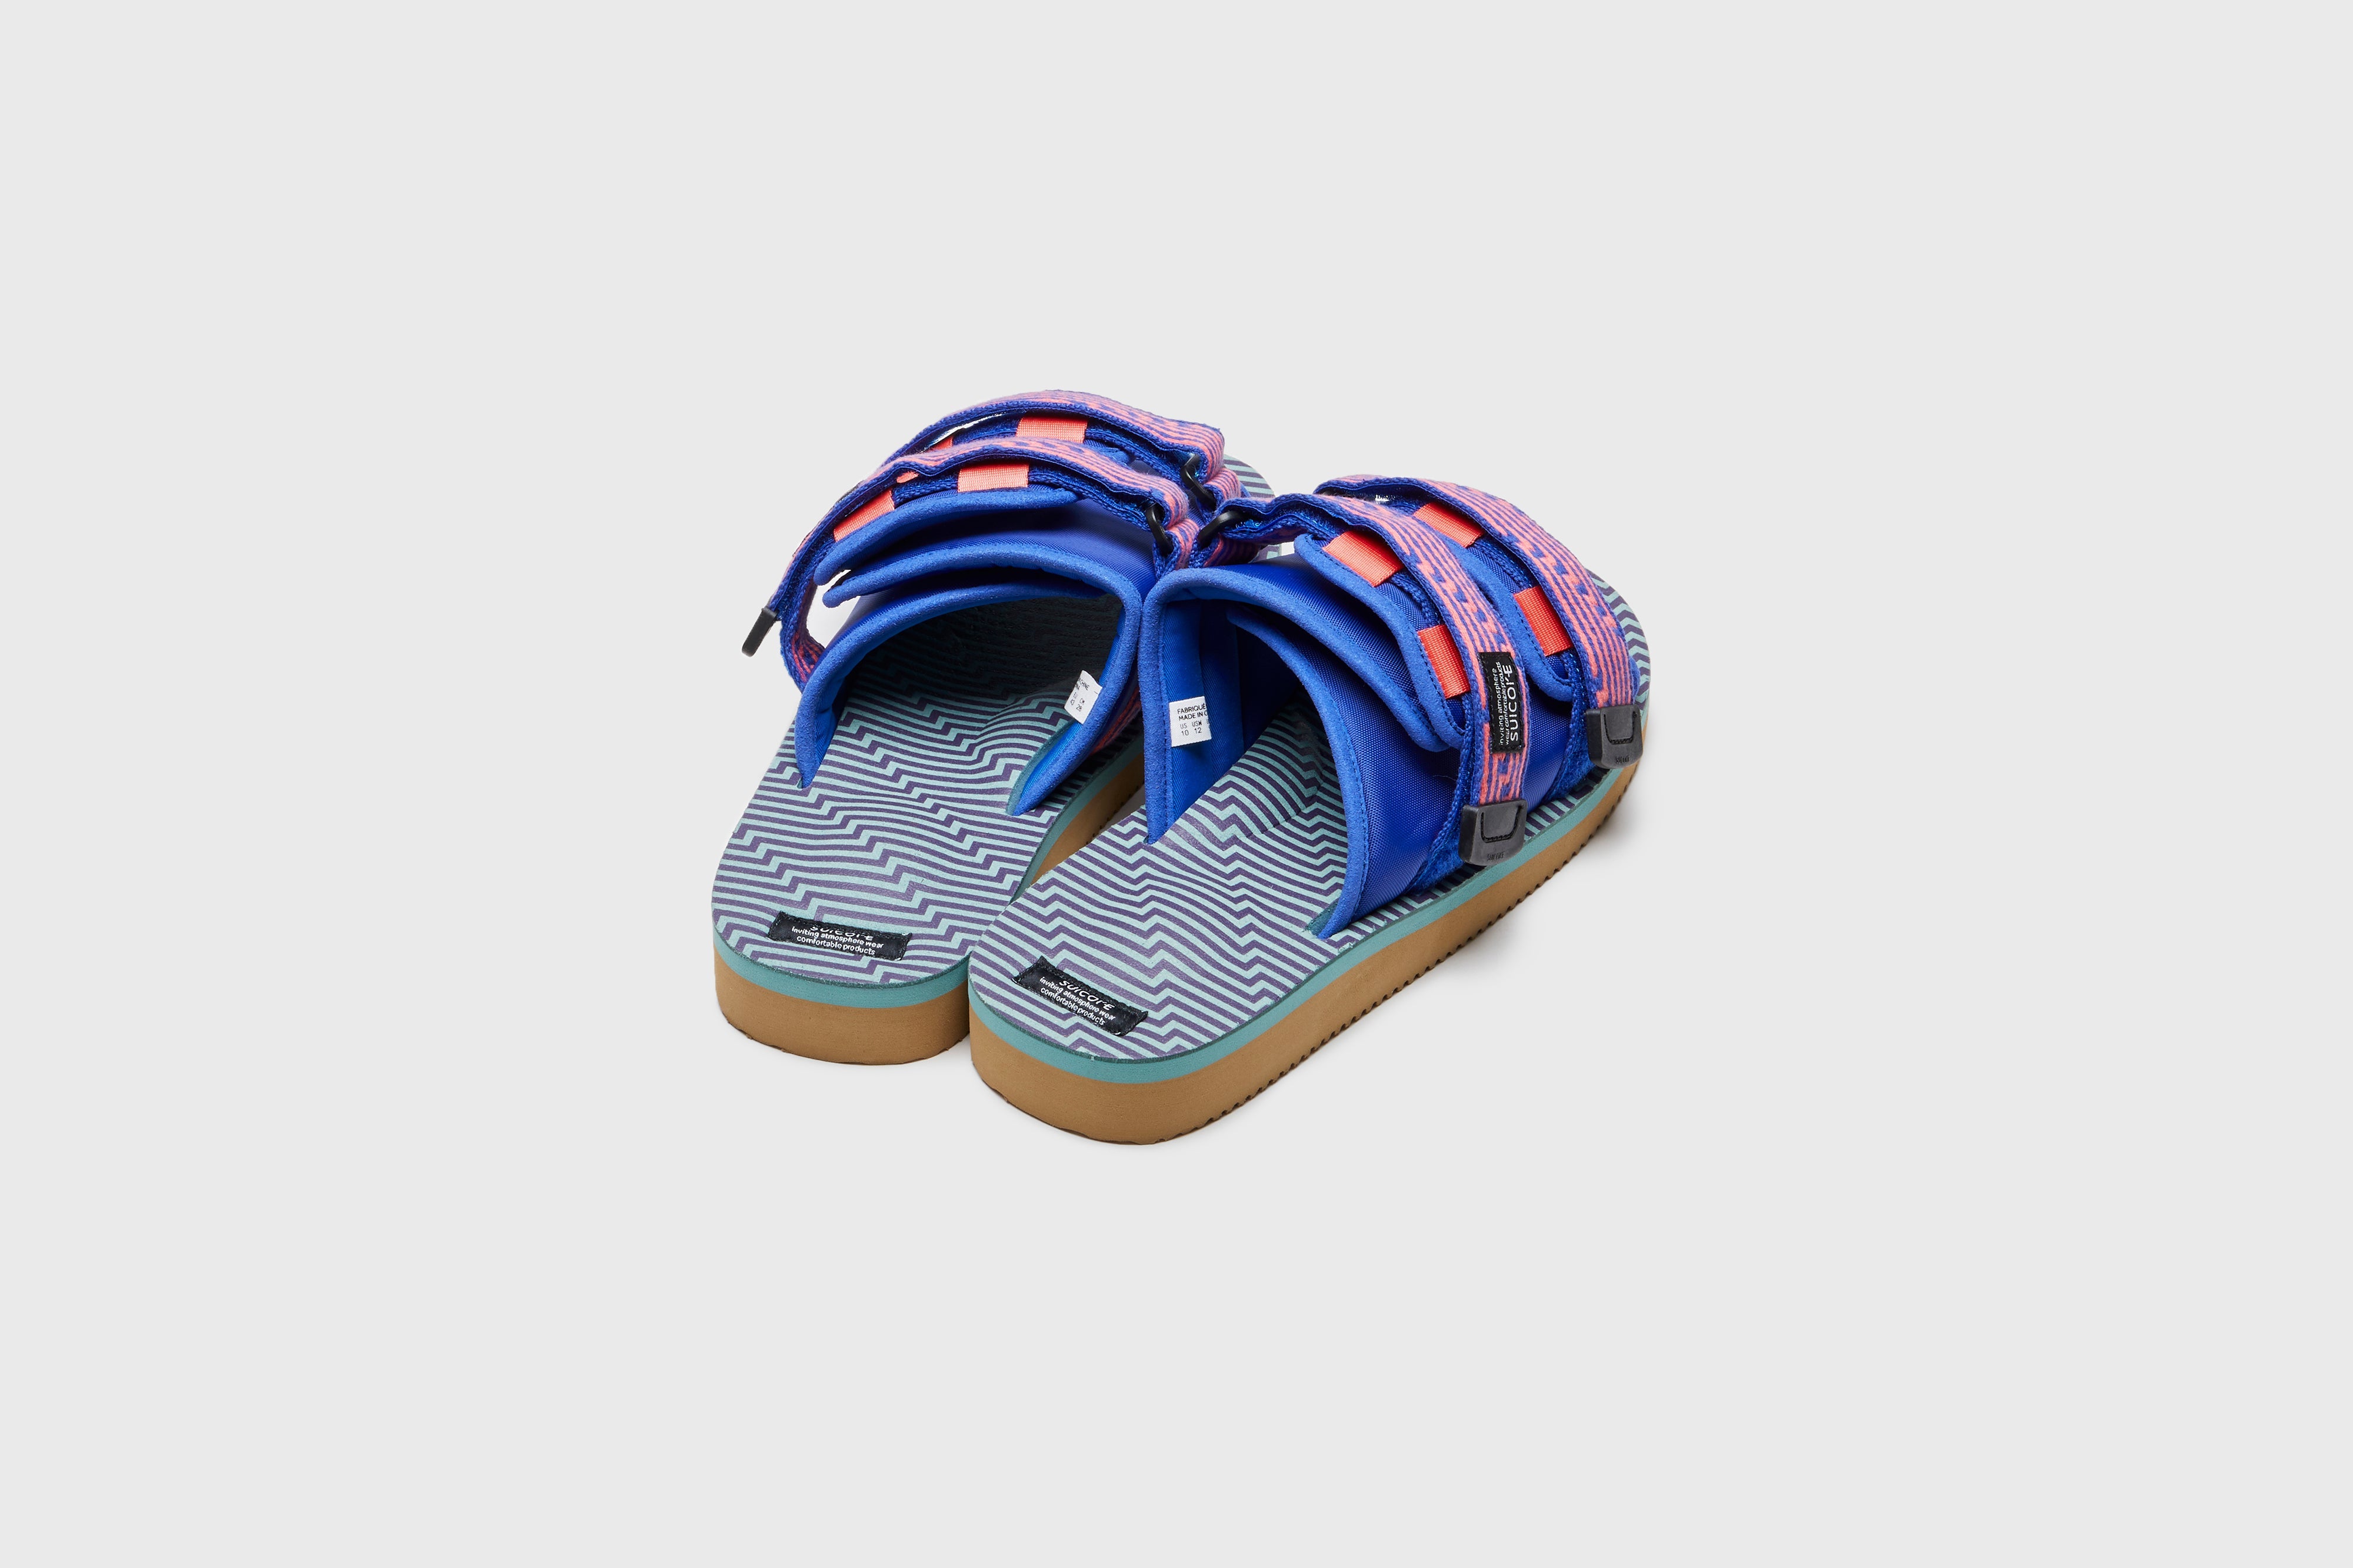 SUICOKE MOTO-JC01 slides with orange &amp; blue nylon upper, orange &amp; blue midsole and sole, strap and logo patch. From Spring/Summer 2023 collection on eightywingold Web Store, an official partner of SUICOKE. OG-056-JC01 ORANGE X BLUE